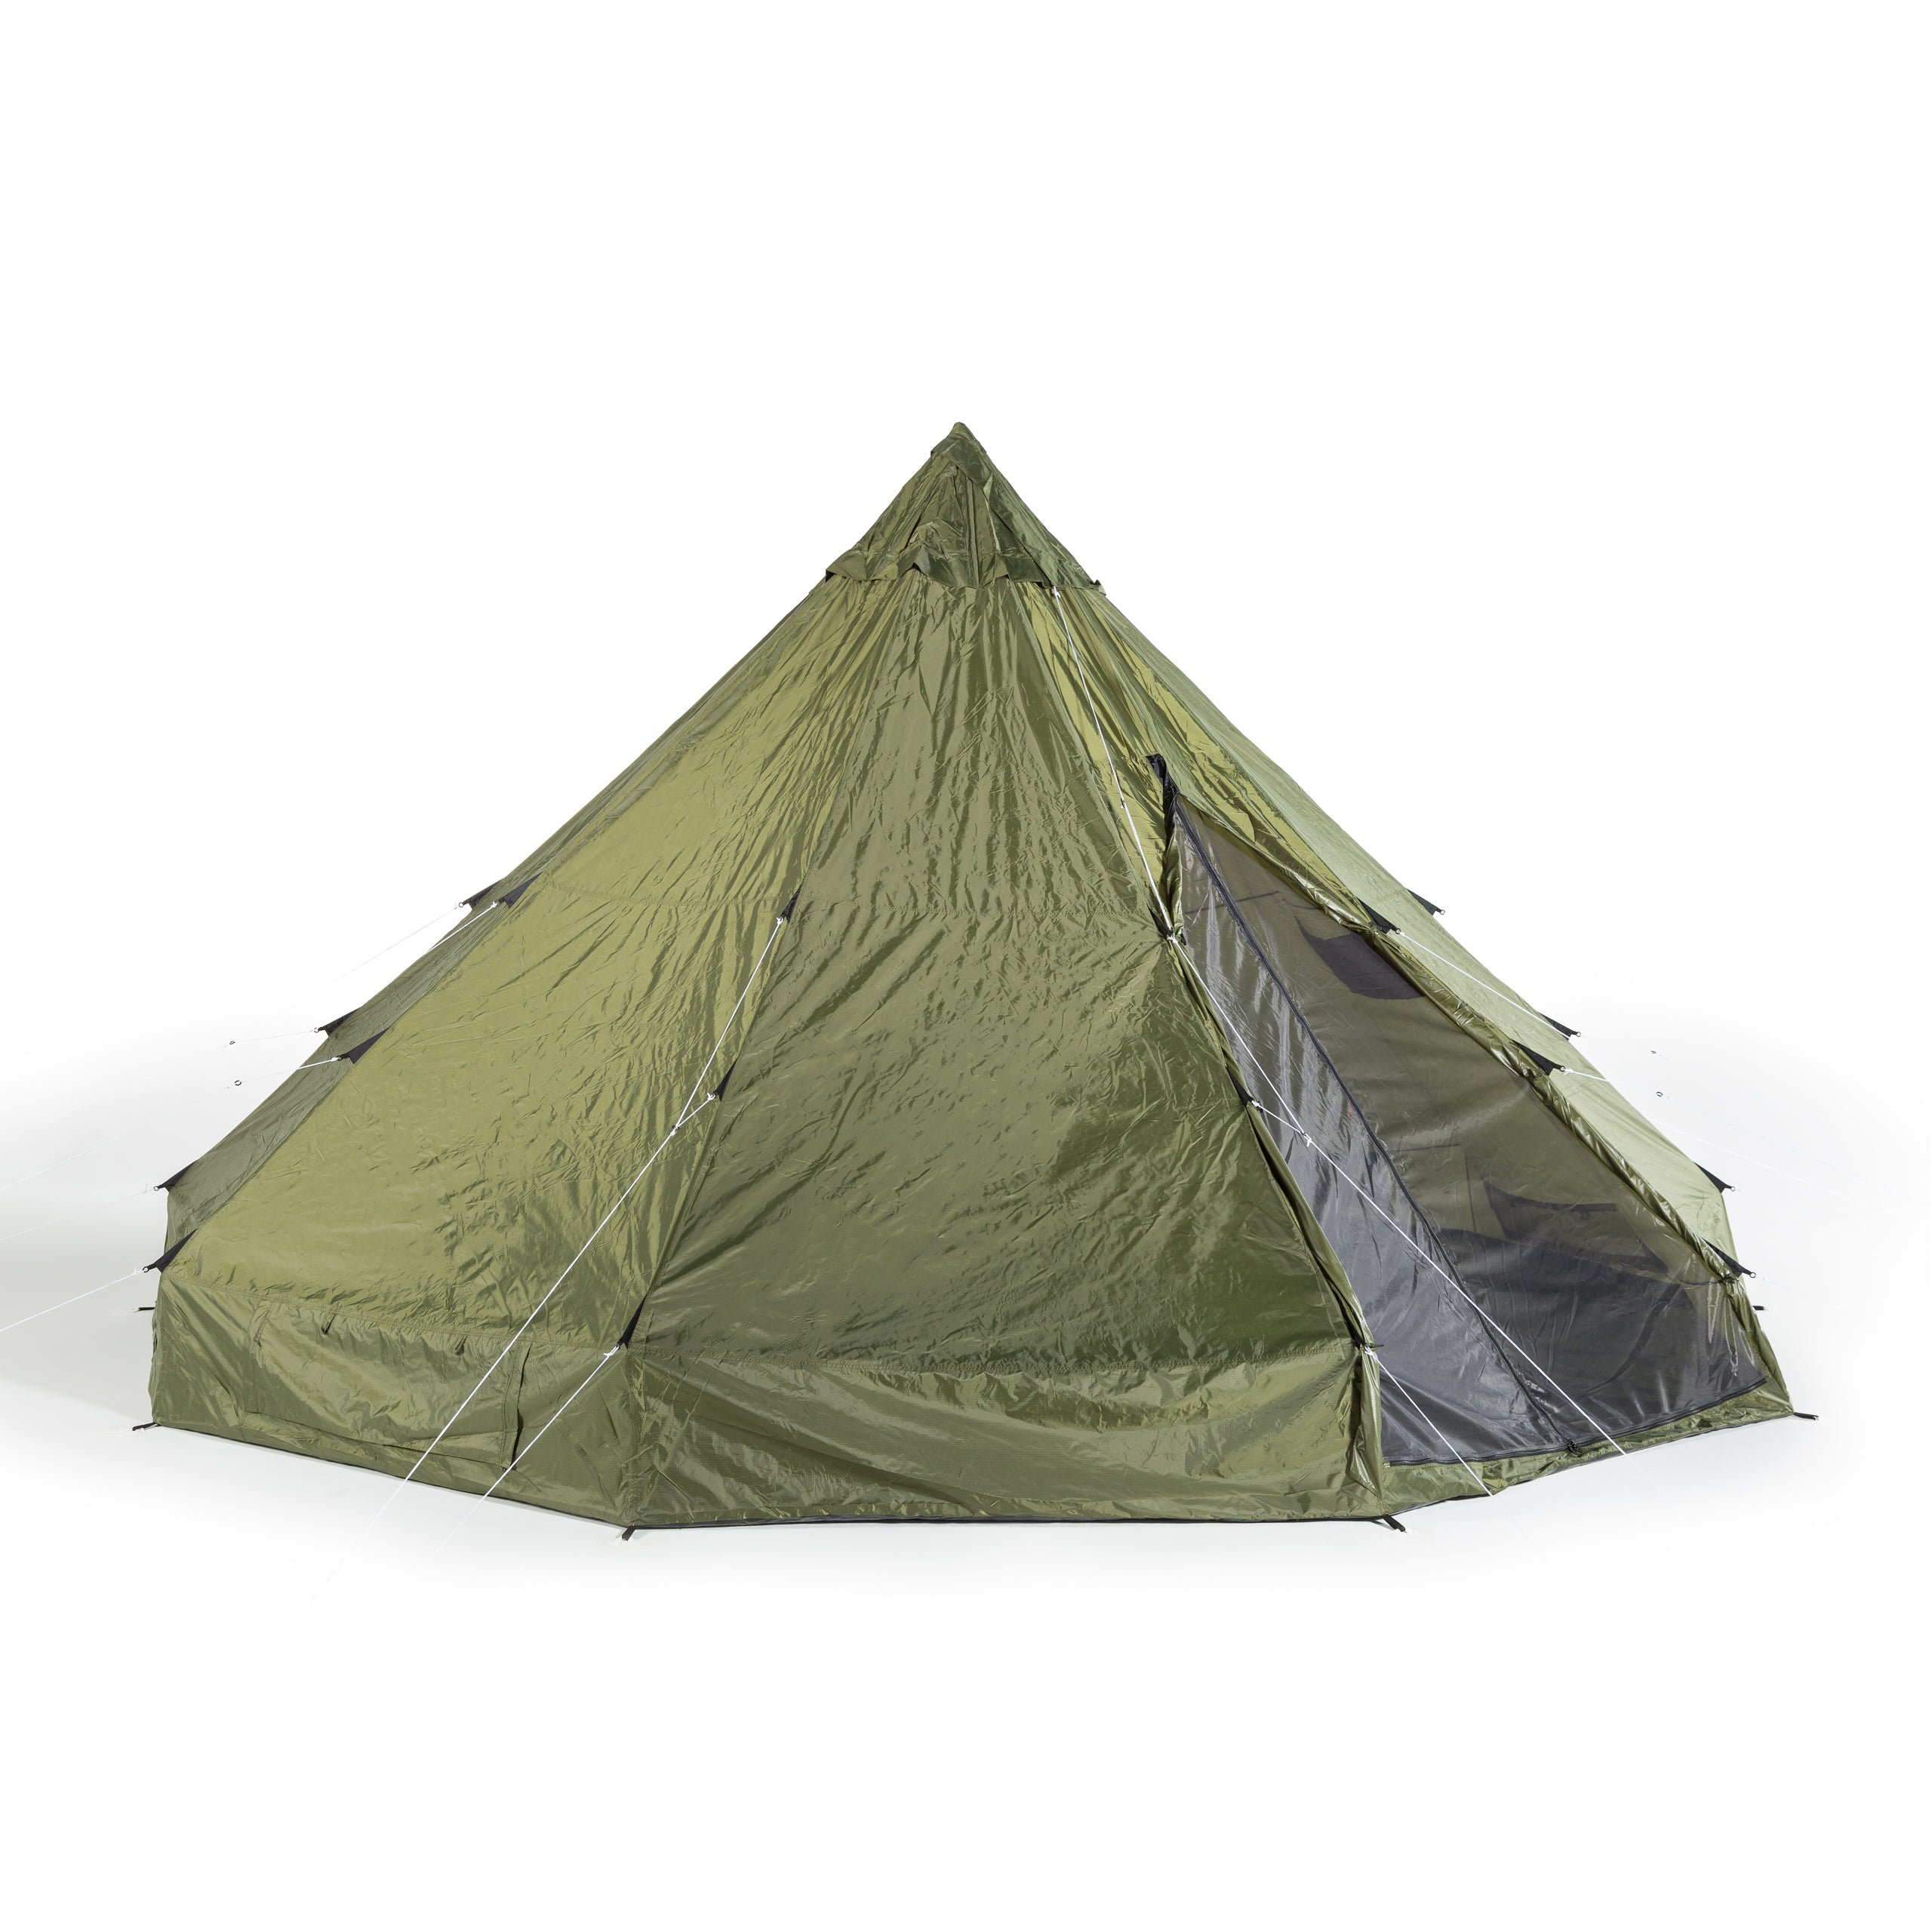 OmniCore Designs 18x18 ft. Deluxe 12-Person TeePee Camping Tent w/Adjustable Vented Roof (NEW)